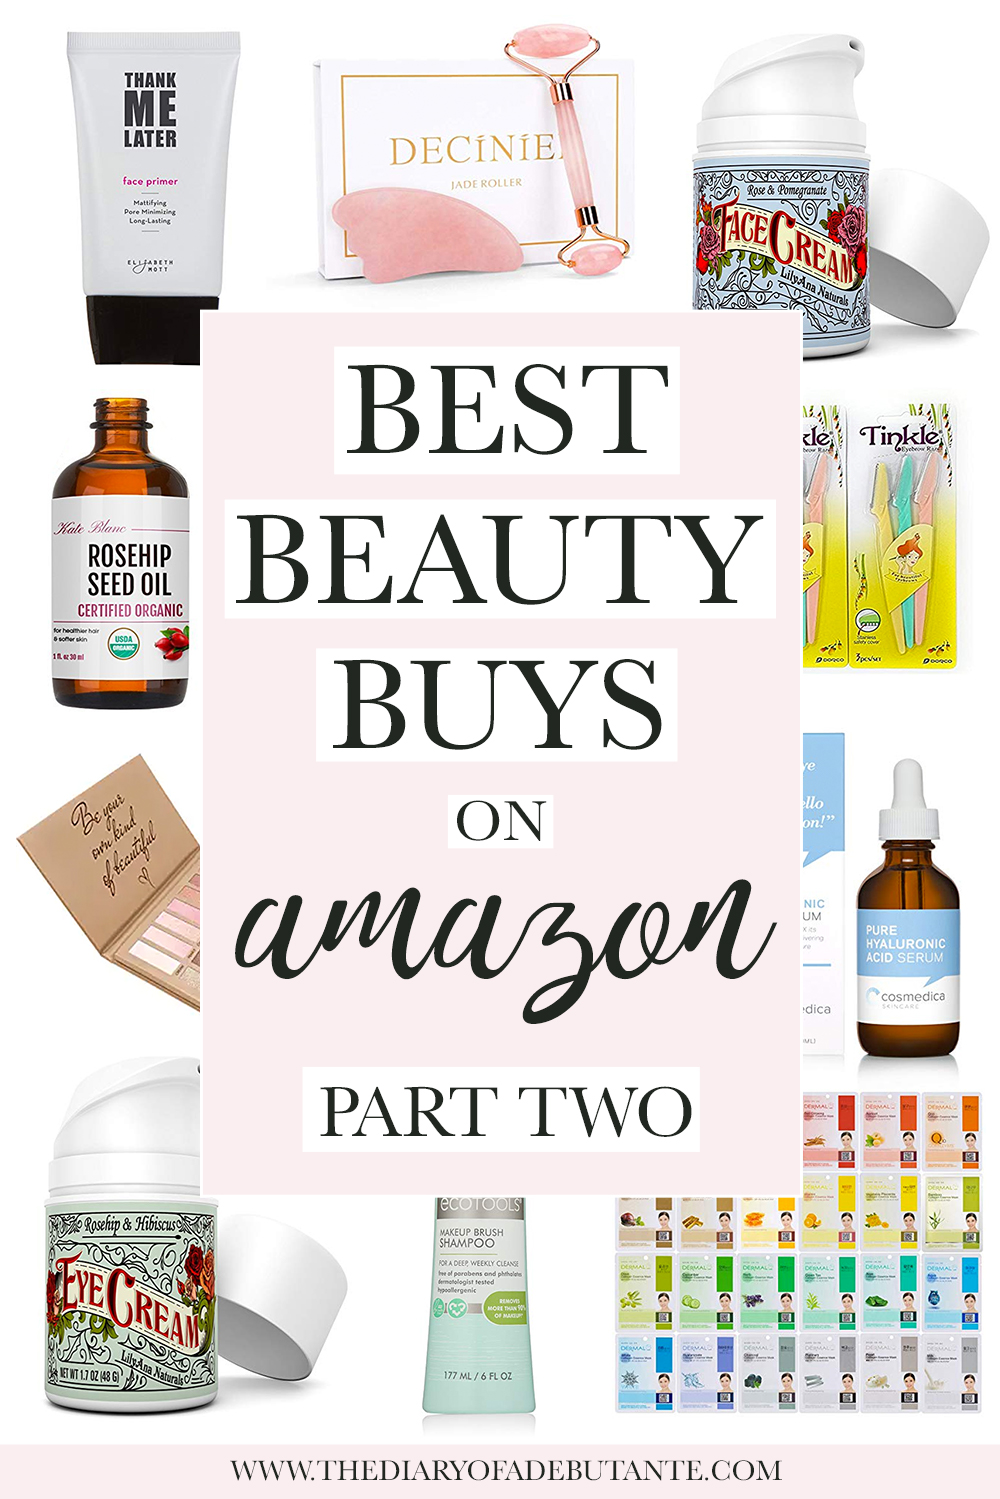 12 of the Best Beauty Products on Amazon: 2019 Edition by popular affordable beauty blogger Stephanie Ziajka on Diary of a Debutante, best beauty buys on Amazon, best Amazon beauty products 2019